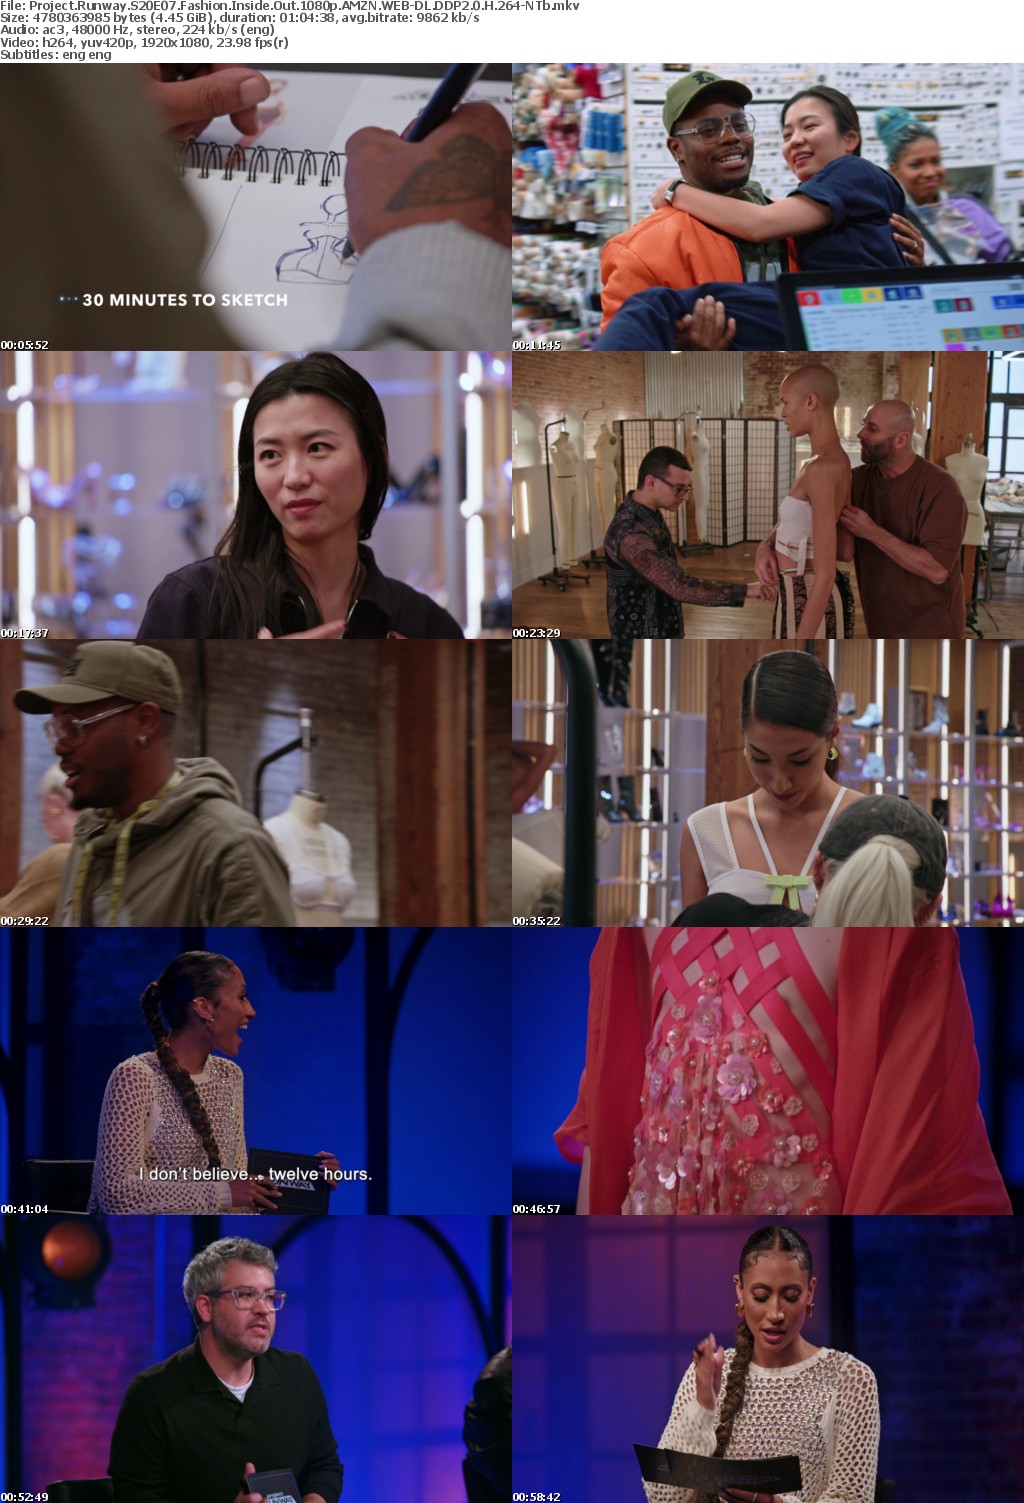 Project Runway S20E07 Fashion Inside Out 1080p AMZN WEB-DL DDP2 0 H 264-NTb